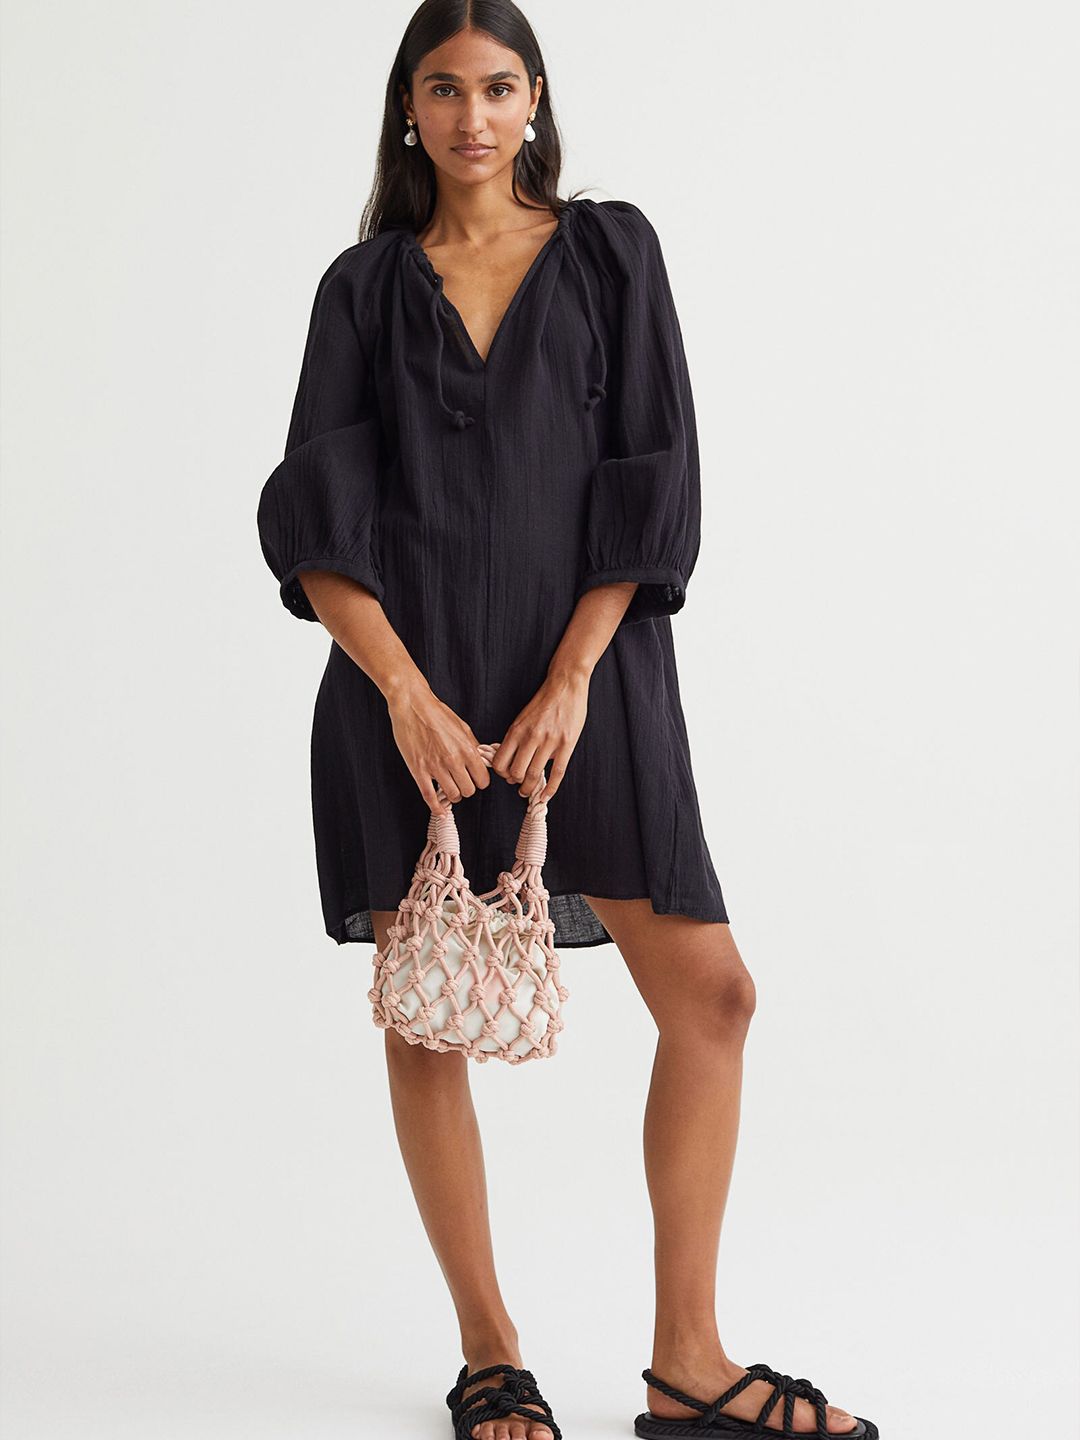 H&M Black Solid Balloon-Sleeved Dress Price in India